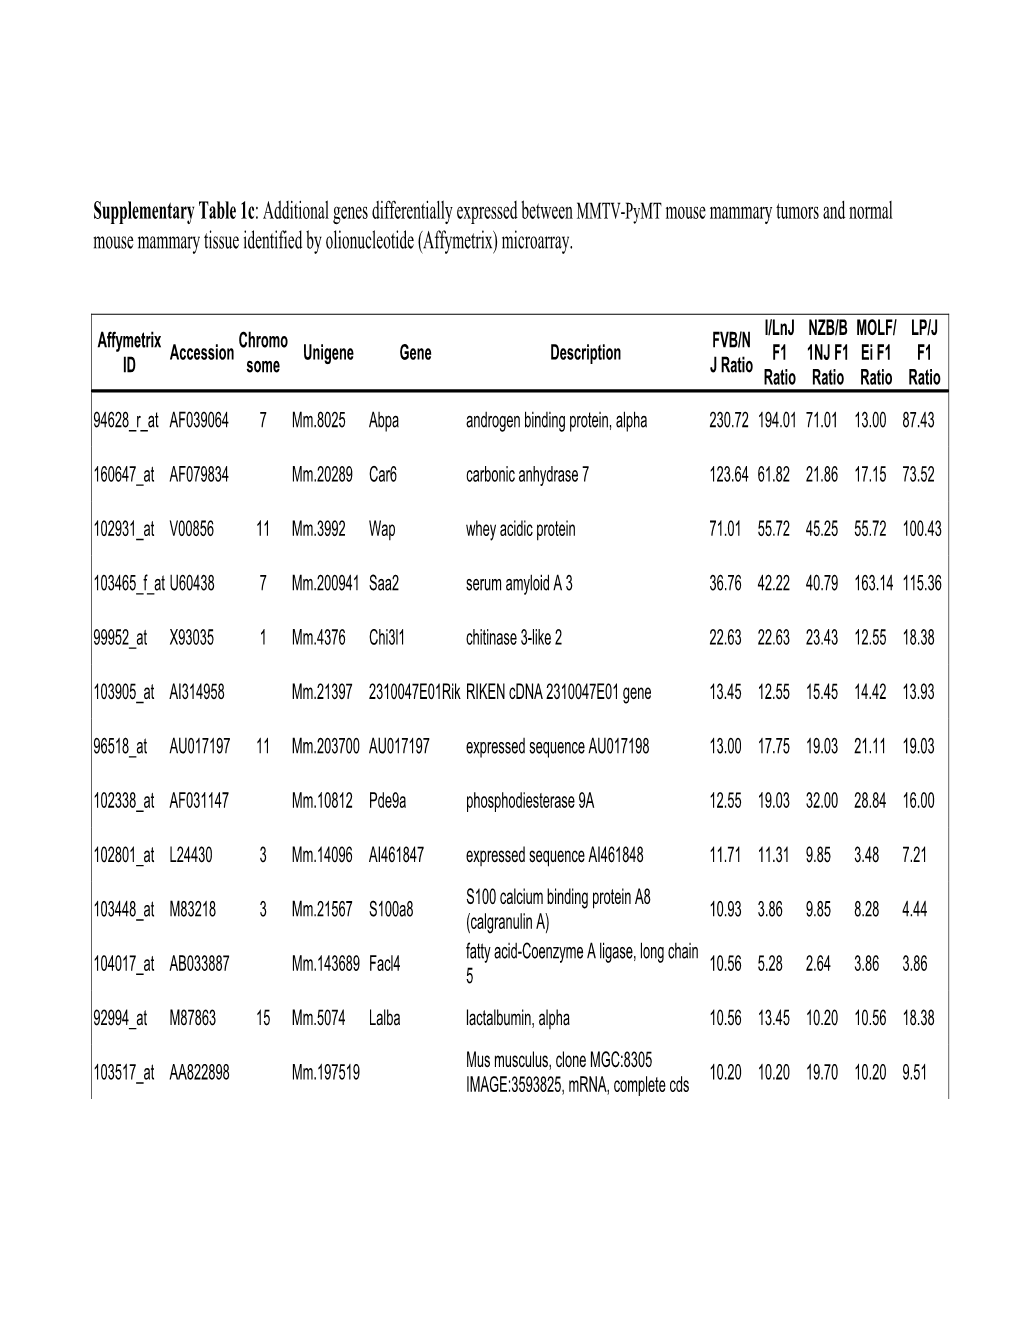 Supplementary Table 1C: Additional Genes Differentially Expressed Between MMTV-Pymt Mouse Mammary Tumors and Normal Mouse Mamm